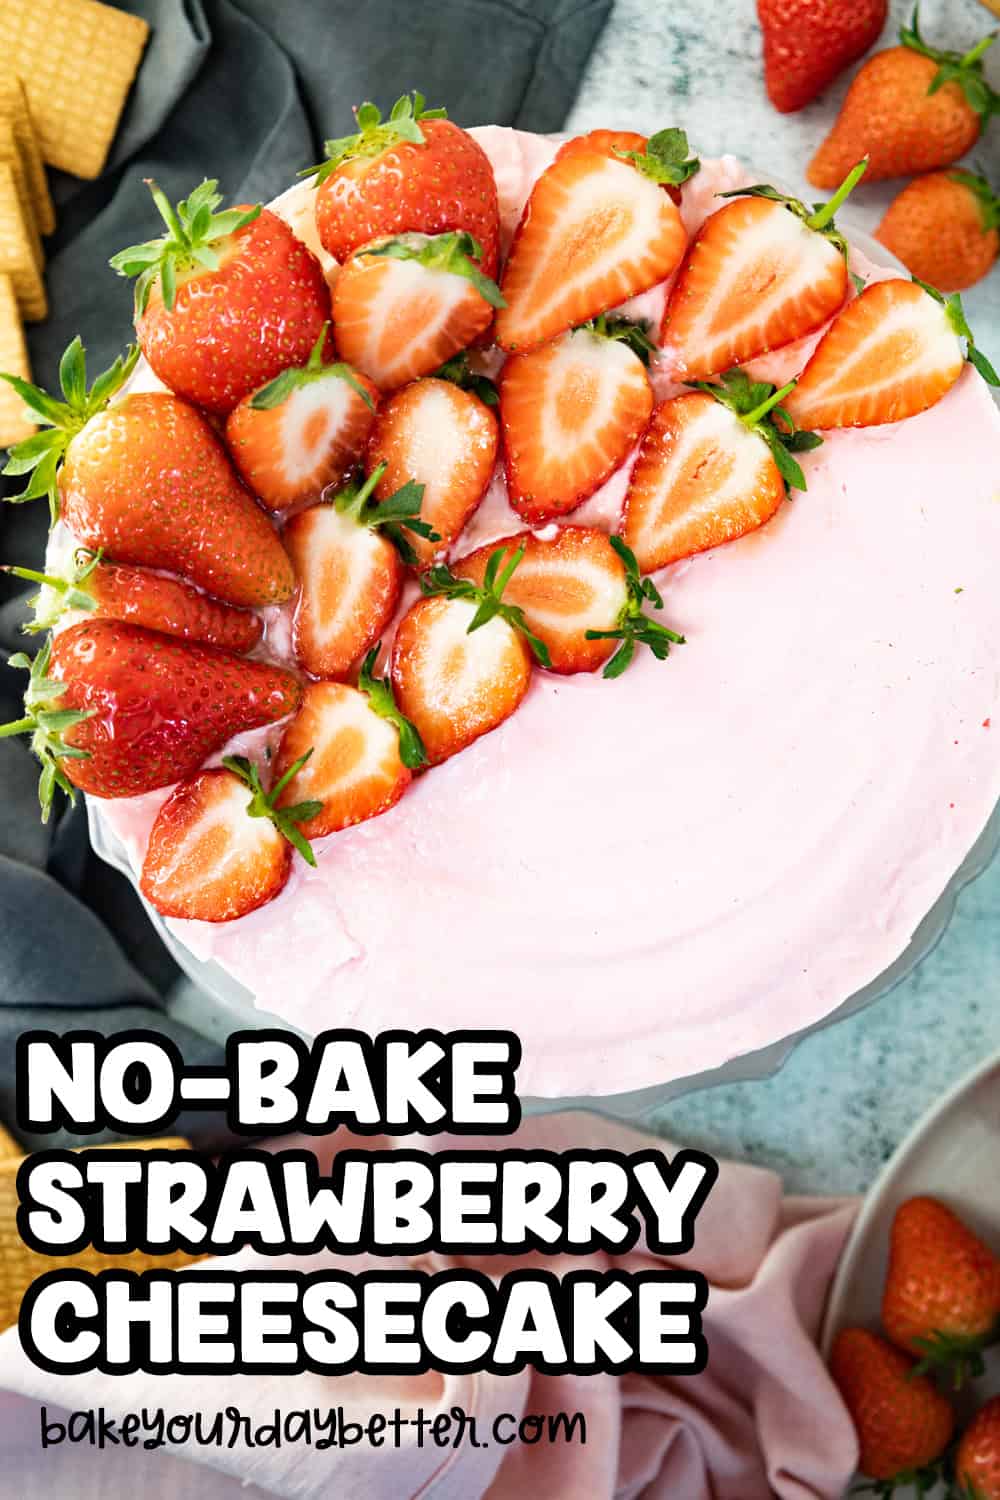 picture of cheesecake with text overlay that says: no bake strawberry cheesecake
